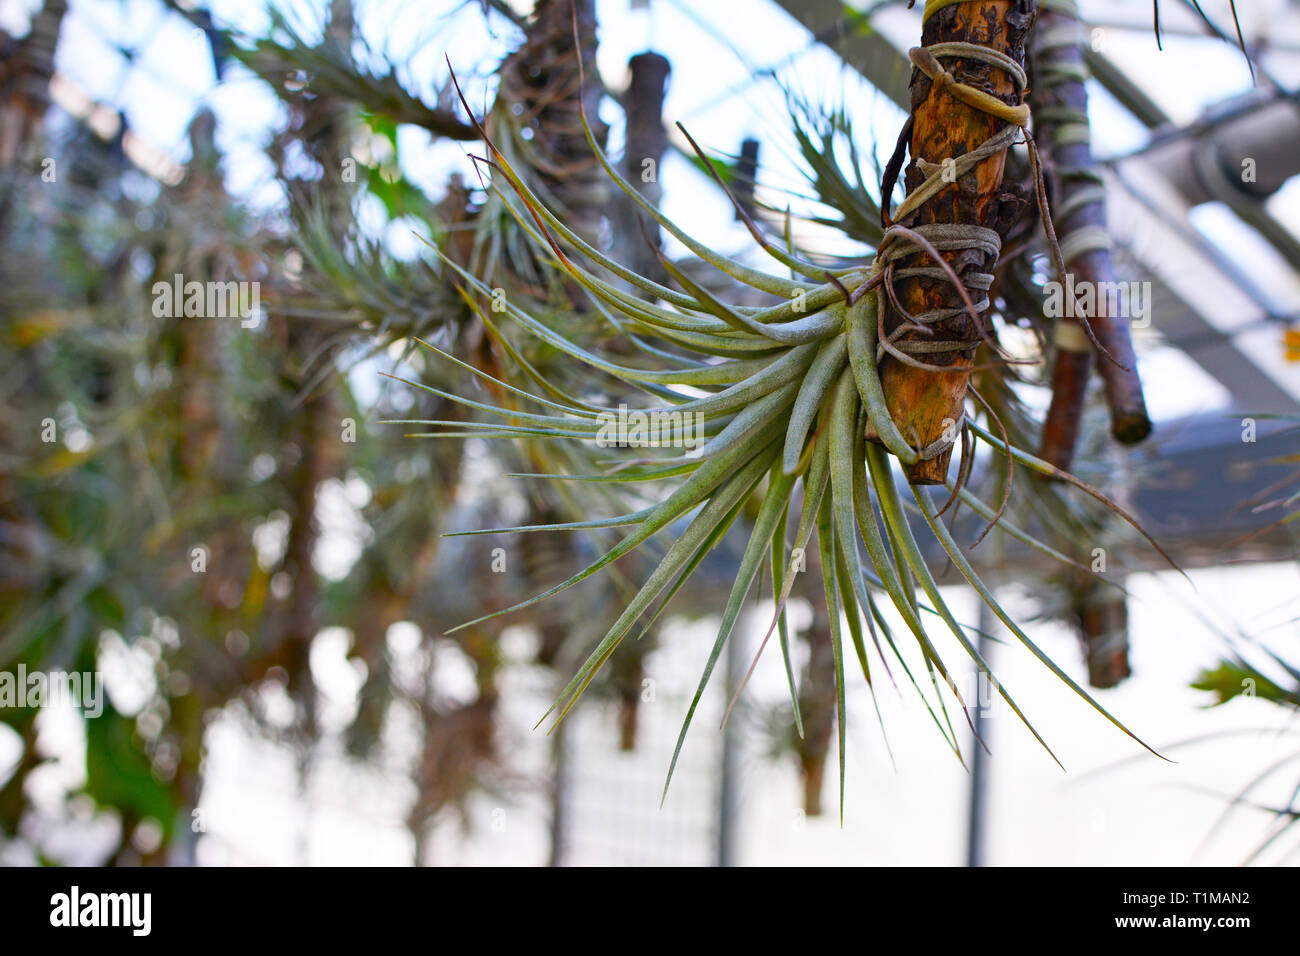 Hanging Tillandsia Airplant capable of absorbing ambient humidity without roots Stock Photo